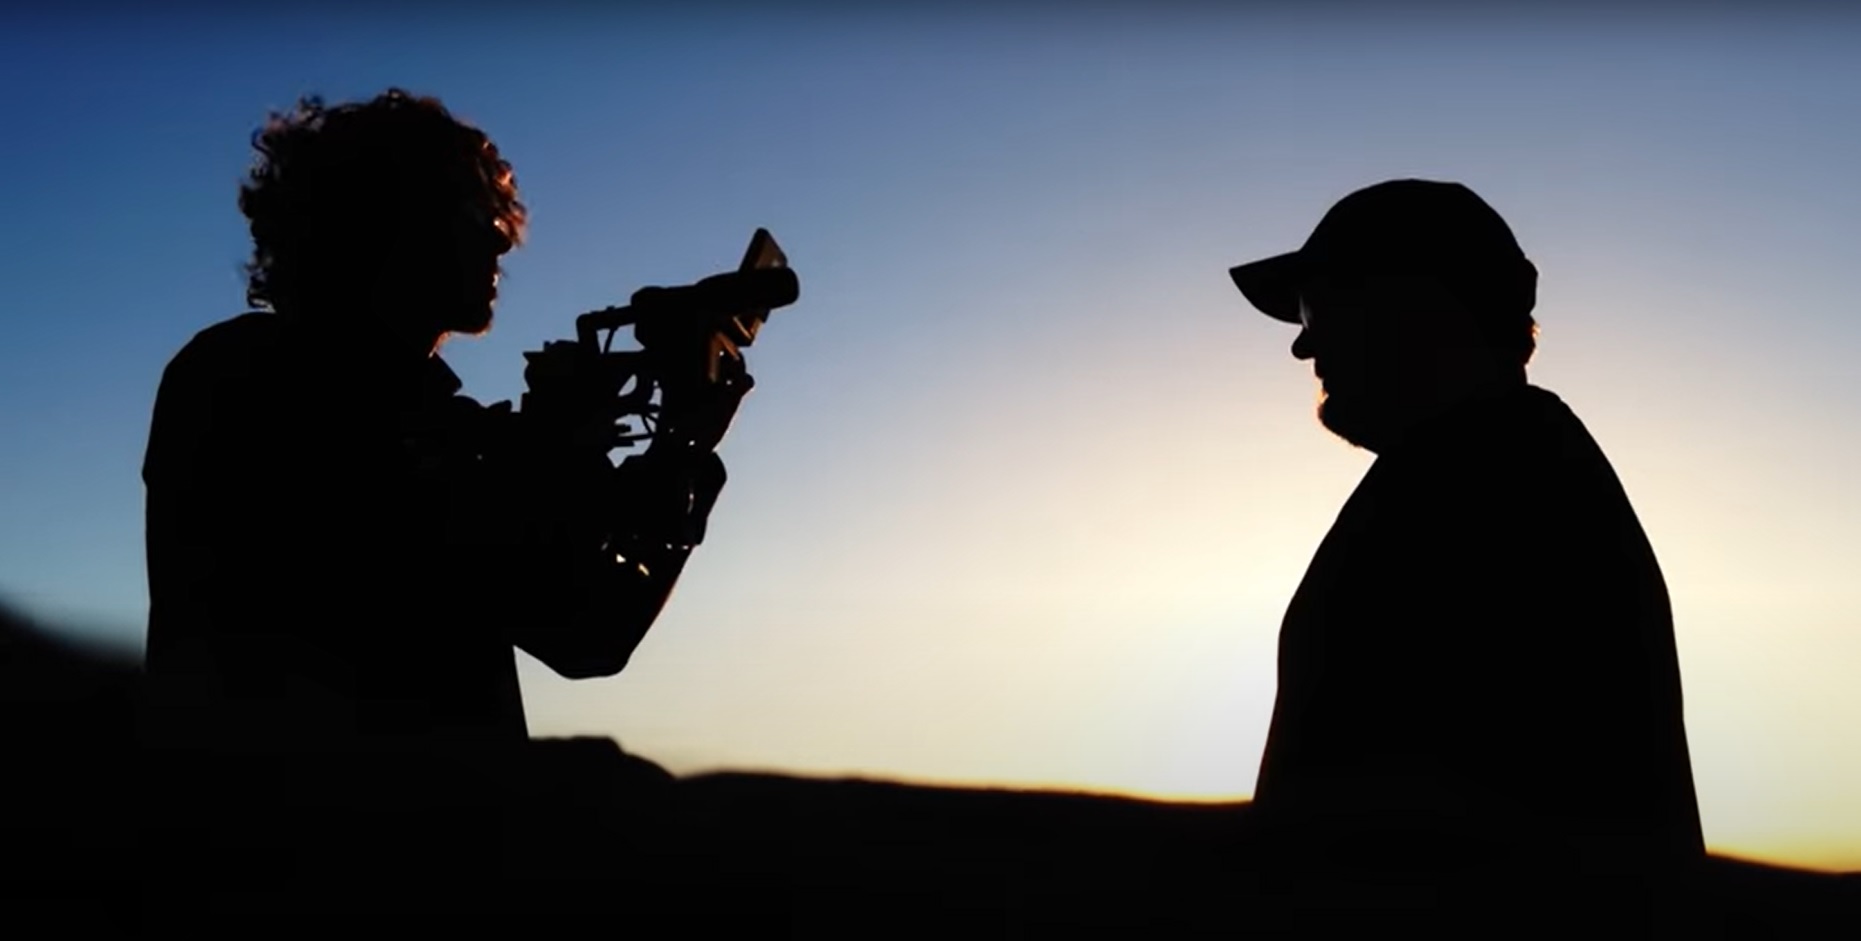 cameraman and director in silhouette